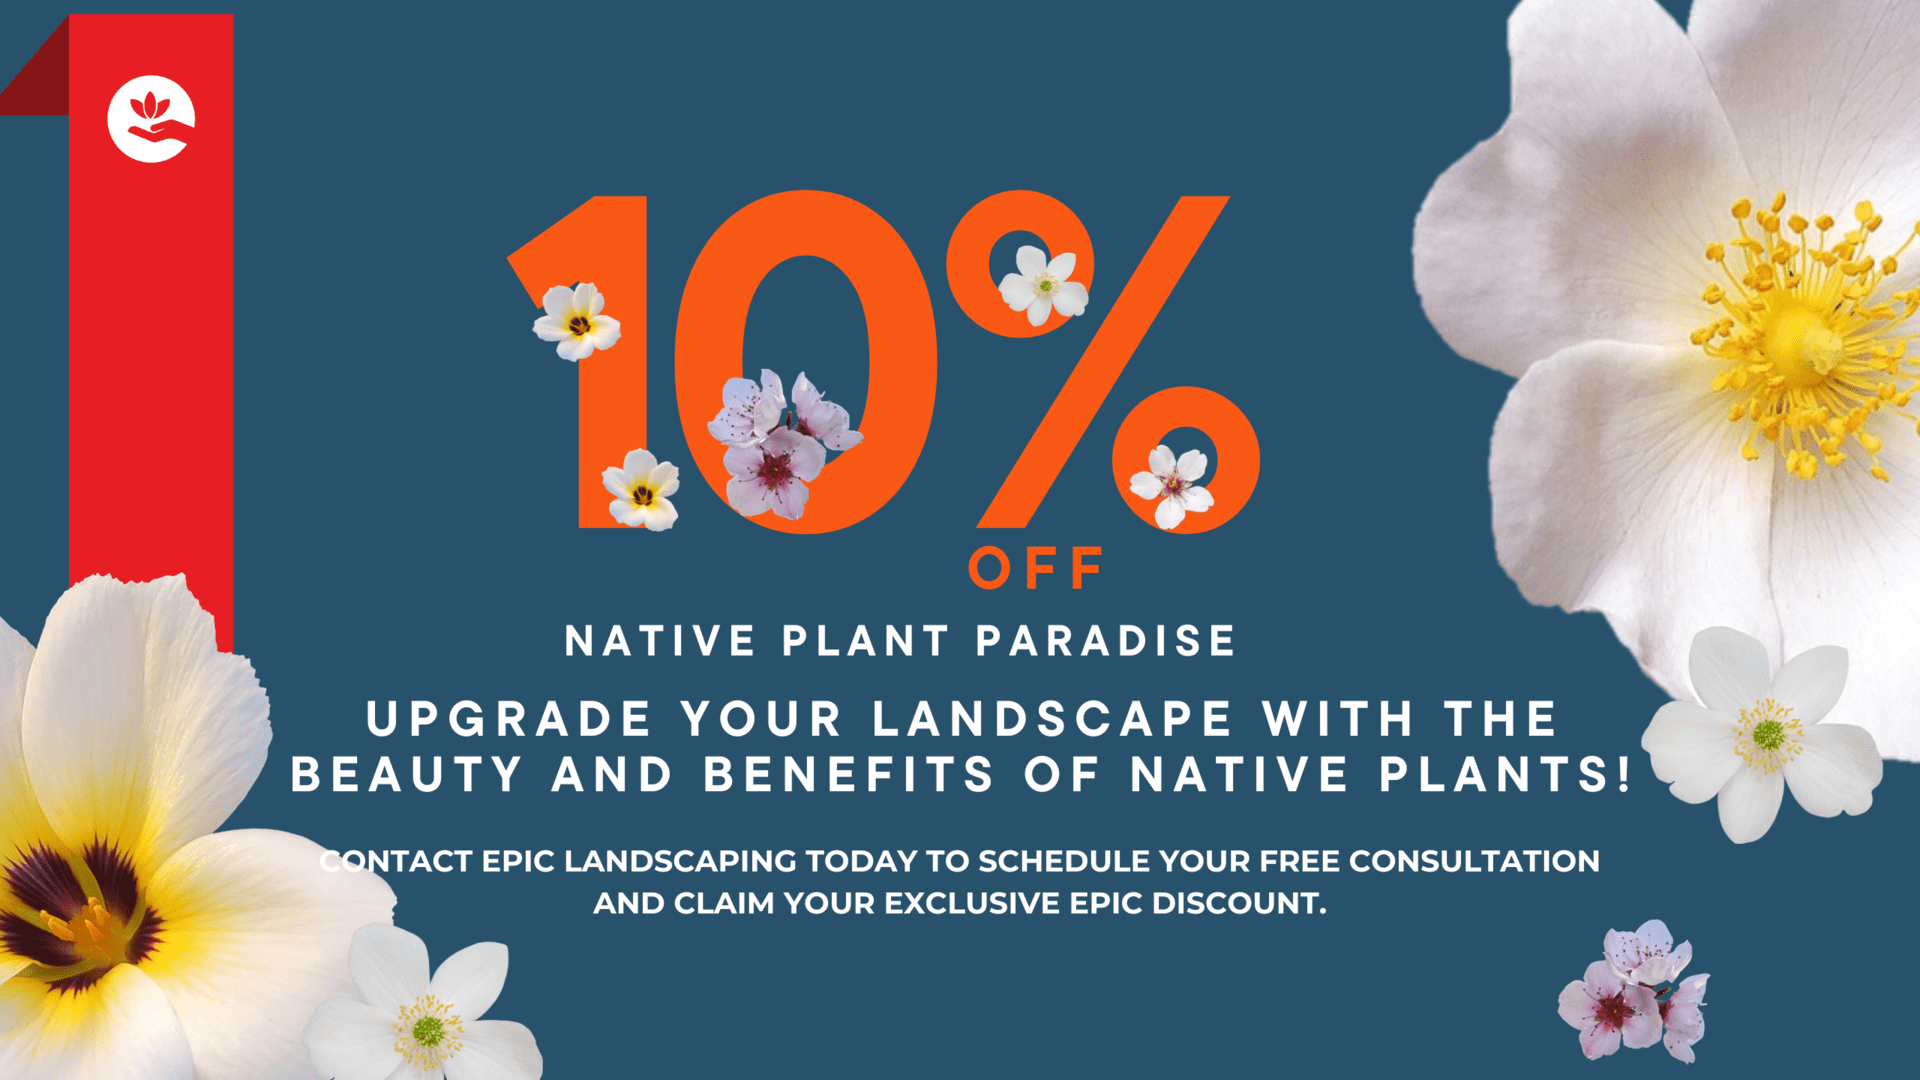 10% OFF native plant paradise. Upgrade your landscape with the beauty and benefits of native plants! Contact EPIC Landscaping today to schedule your free consultation and claim your exclusive EPIC discount.